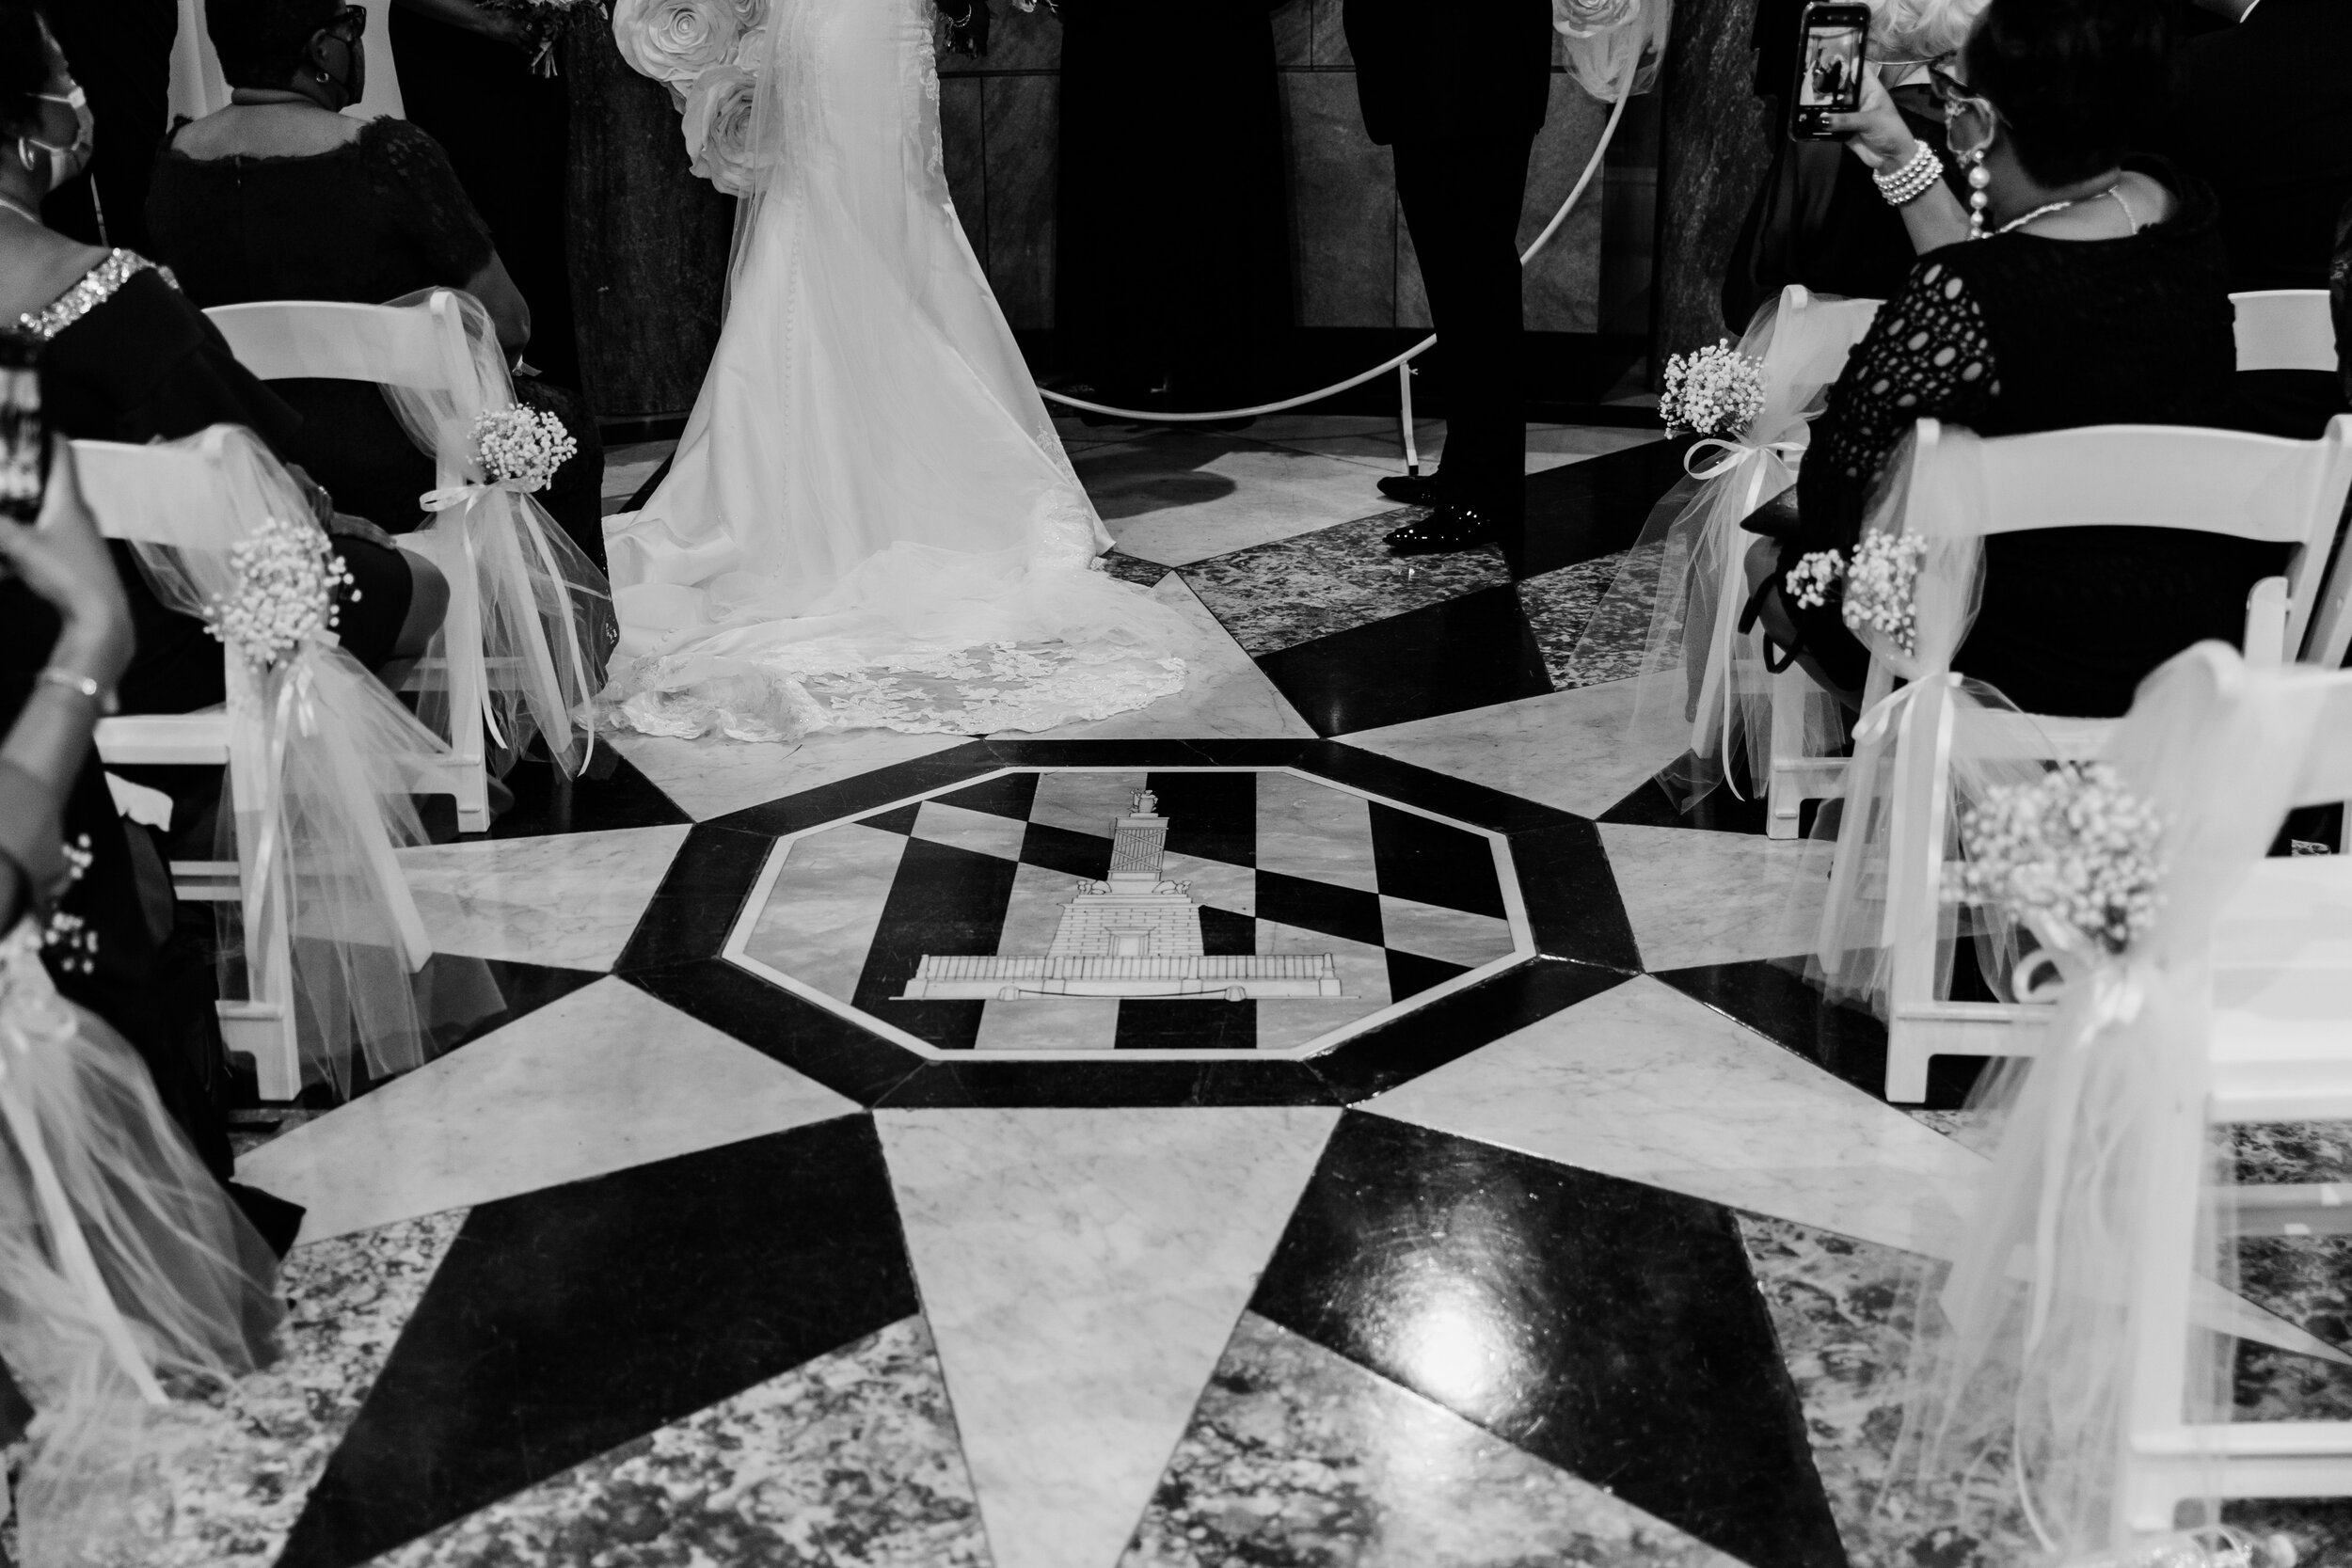 get married in baltimore city hall shot by megapixels media biracial couple wedding photographers maryland-66.jpg